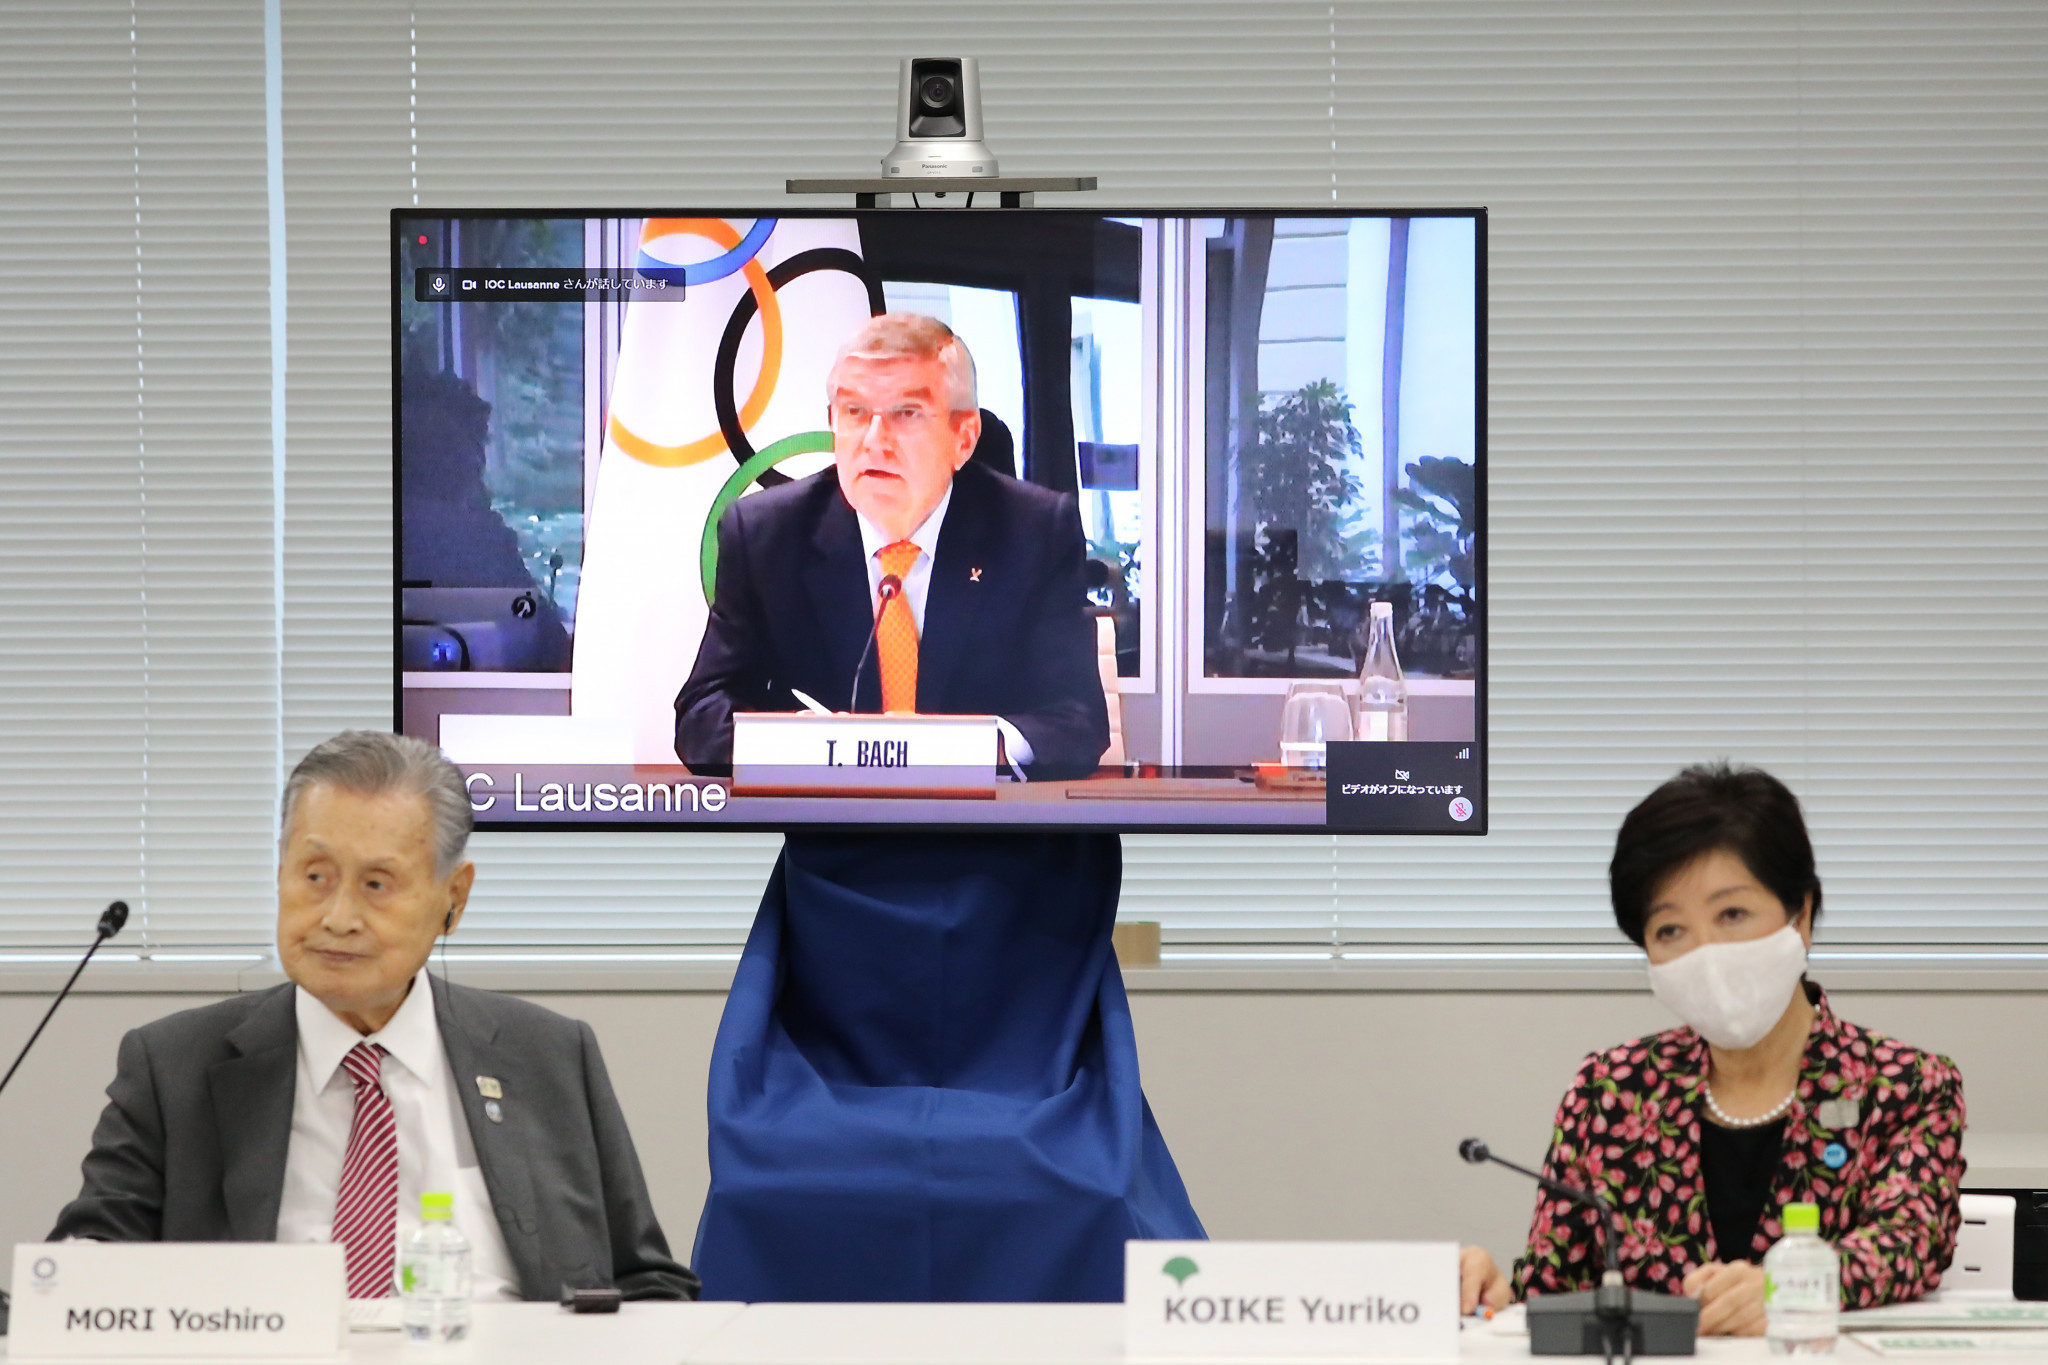 Bach urges organisers to ignore Tokyo 2020 doubters as Coordination Commission meeting begins